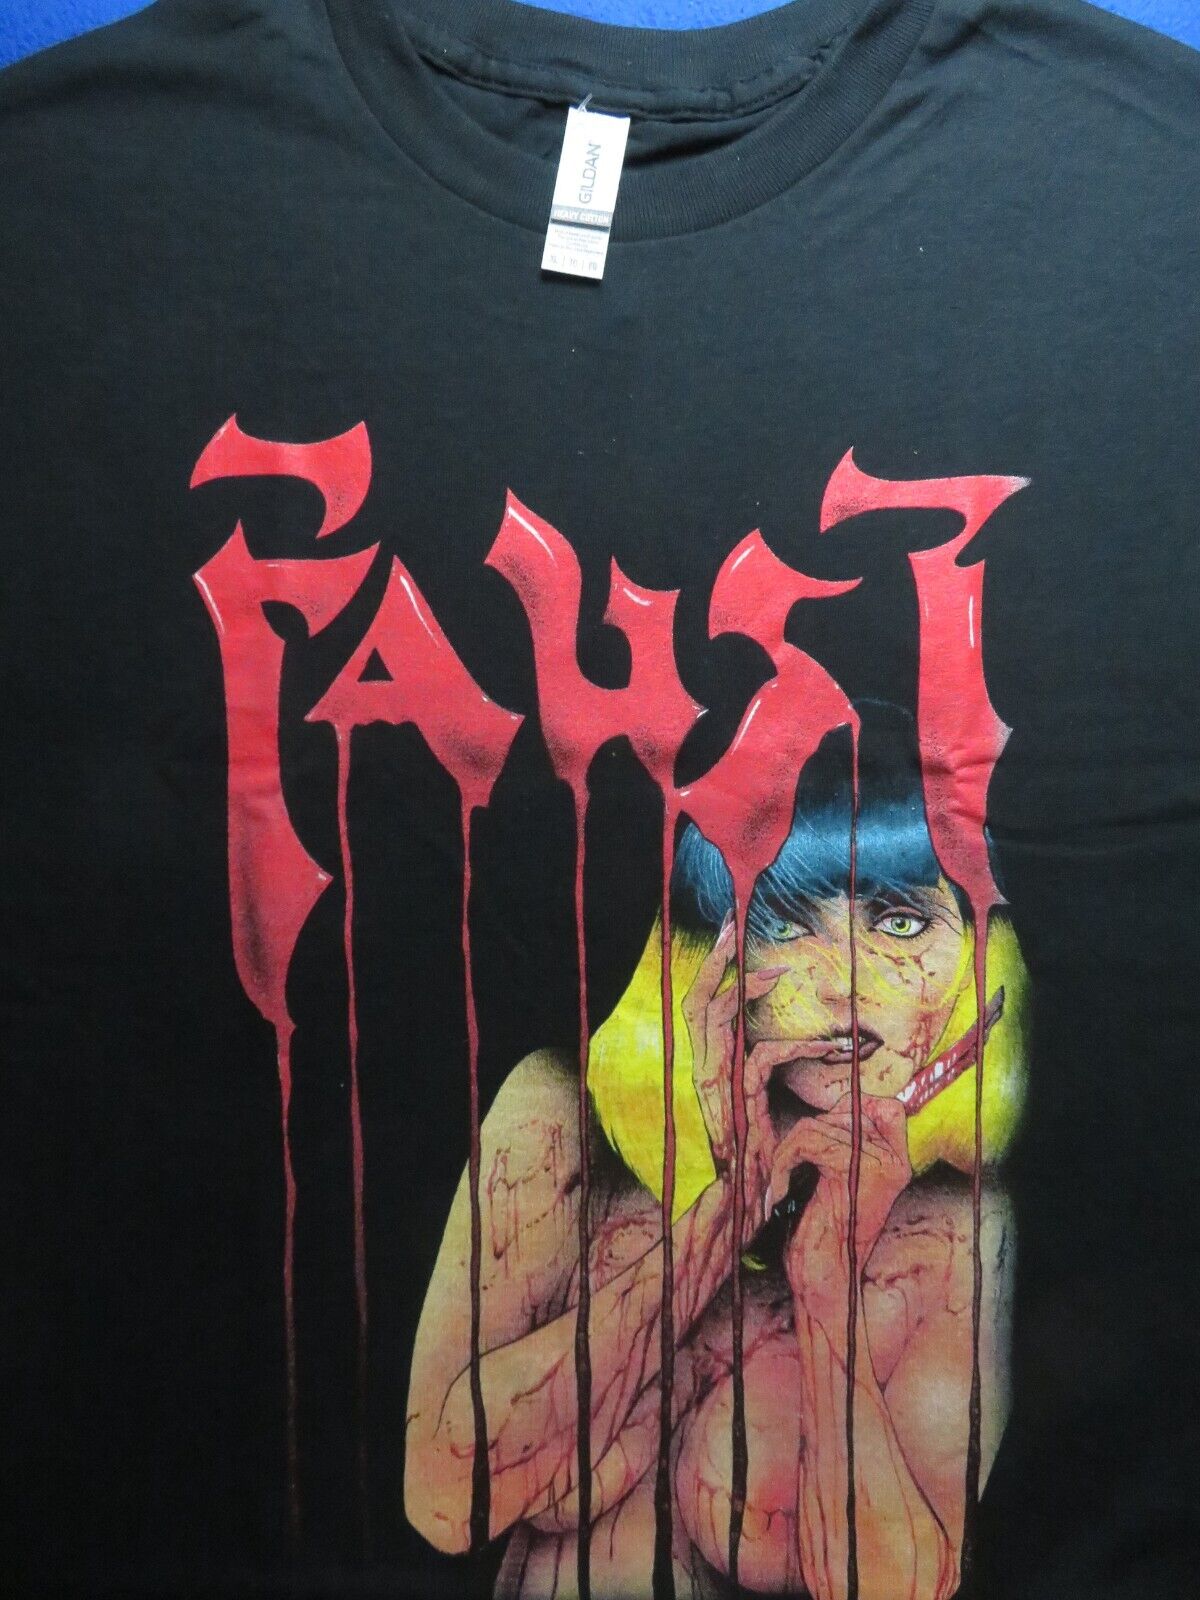 FAUST LOVE OF THE DAMNED  ACT 2  BLACK  X- LARGE SHIRT   REBEL STUDIOS